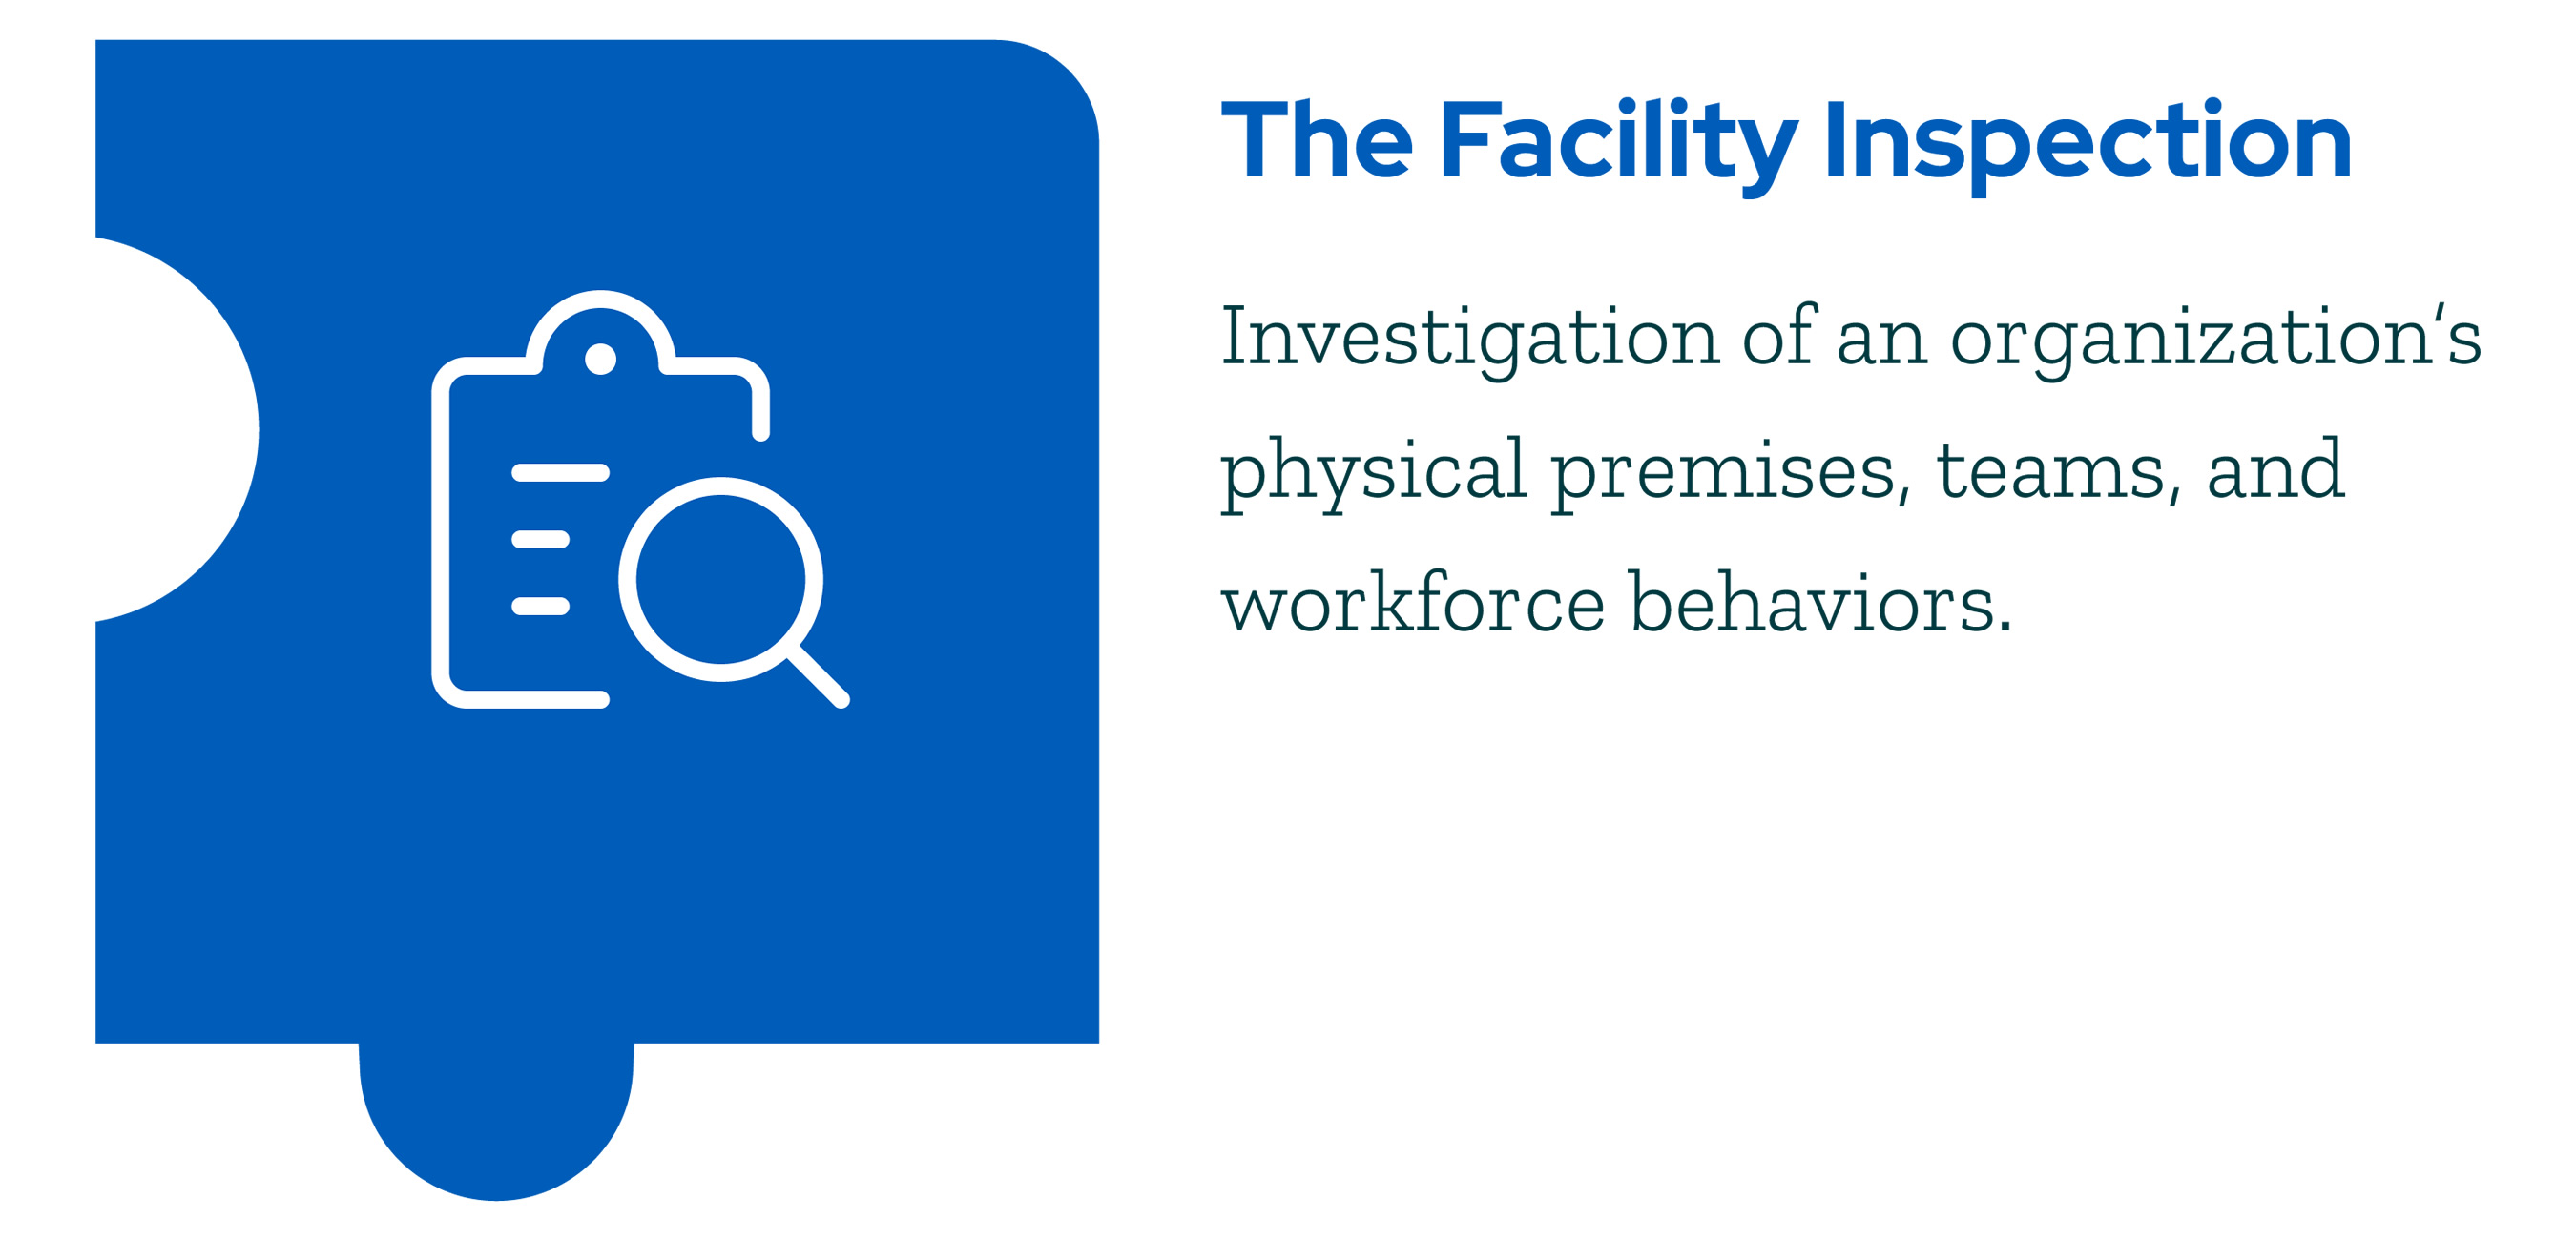 Facility Inspection - Investigation of an organization's physical premises, teams, and workforce behaviors